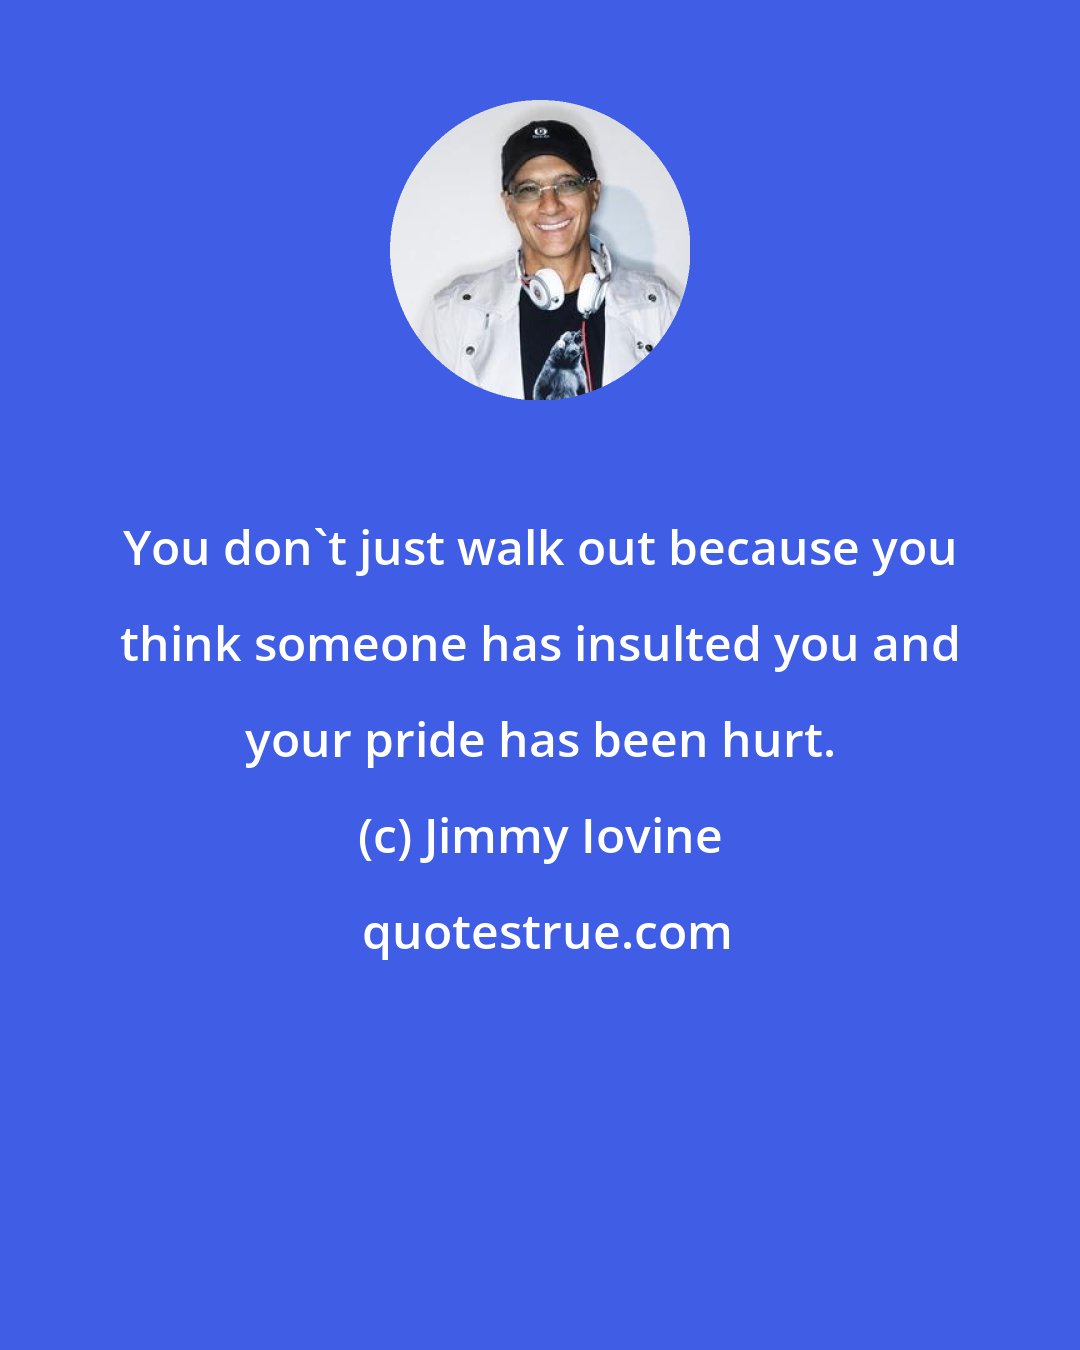 Jimmy Iovine: You don't just walk out because you think someone has insulted you and your pride has been hurt.